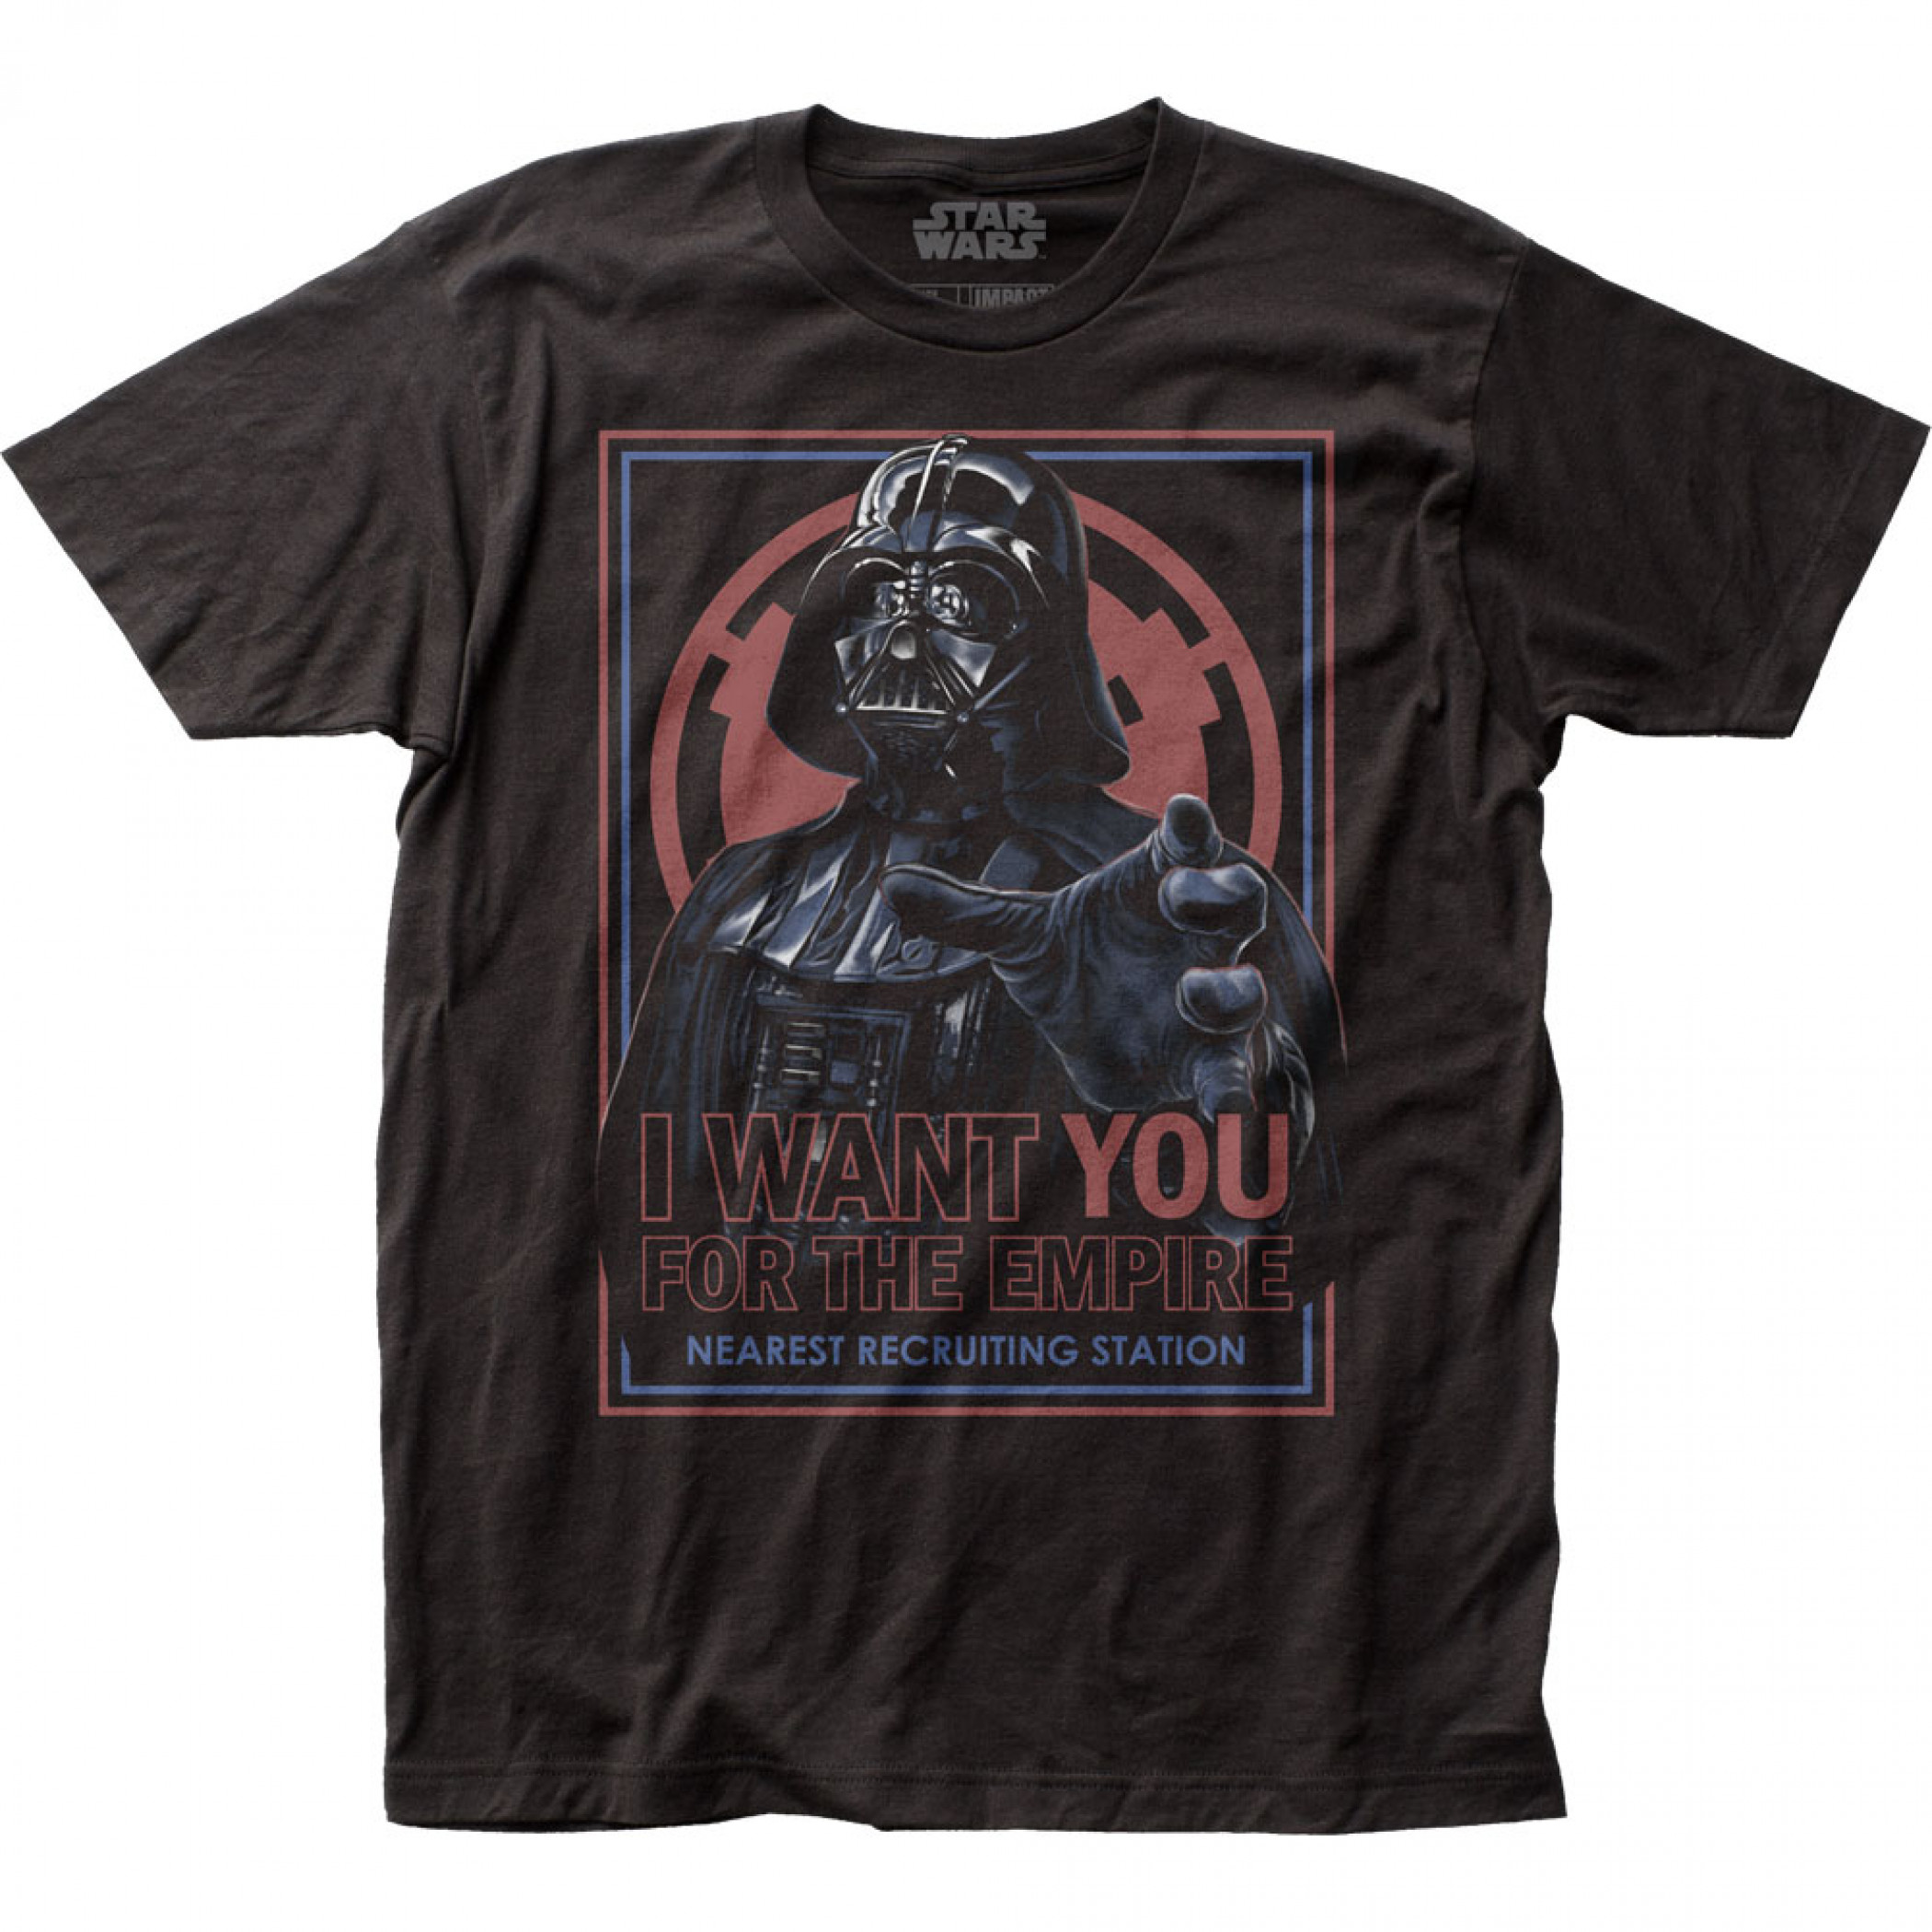 Star Wars Darth Vader I Want You For The Empire T-Shirt